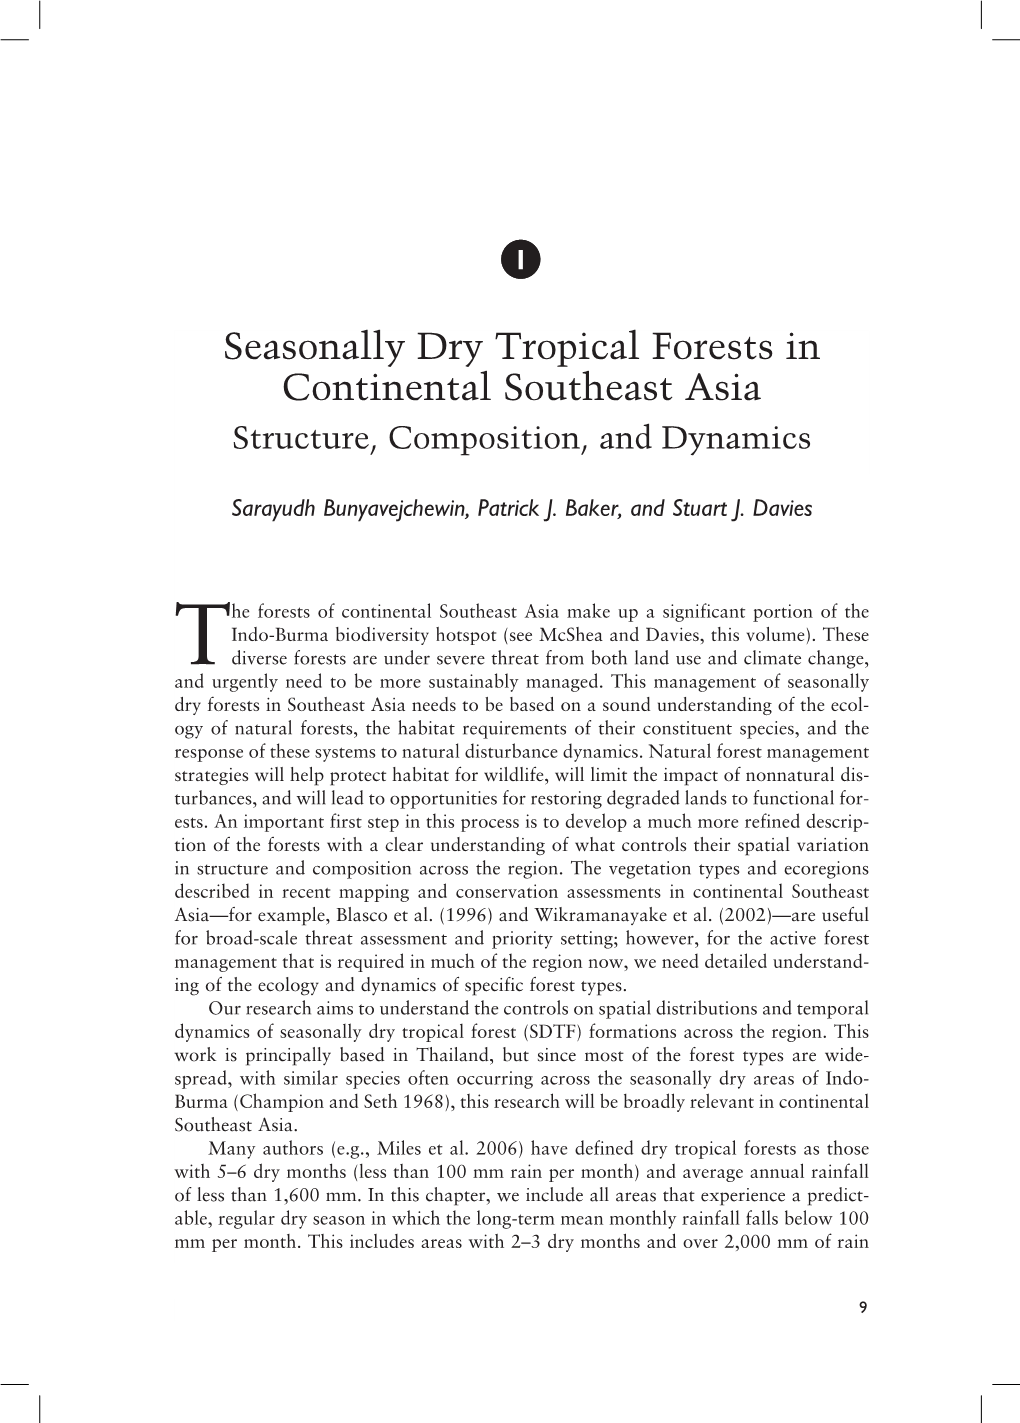 Seasonally Dry Tropical Forests in Continental Southeast Asia Structure, Composition, and Dynamics